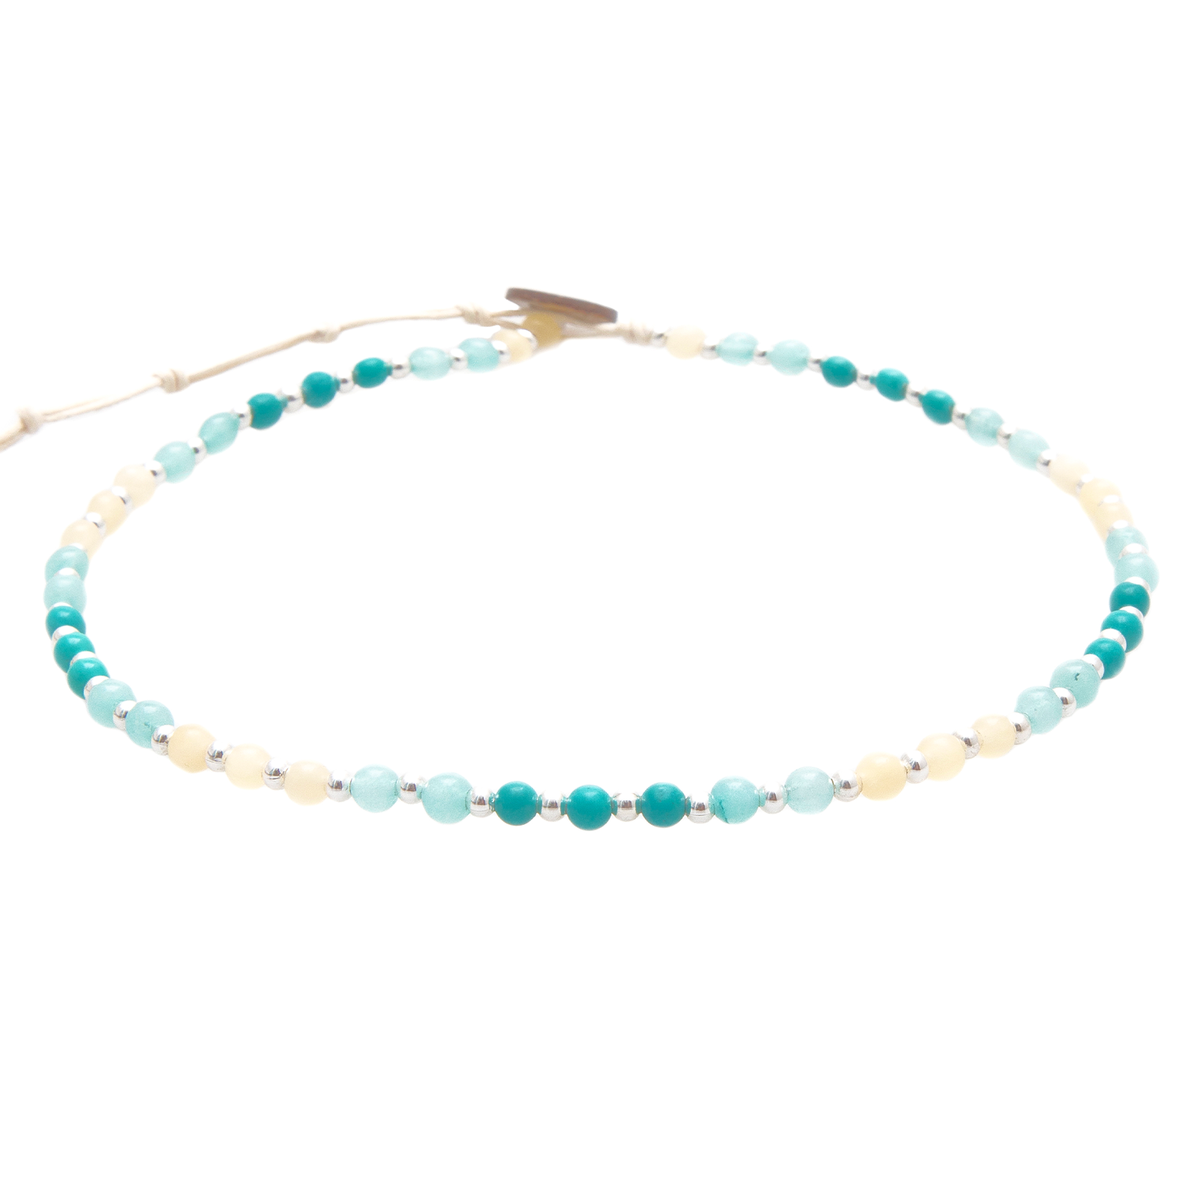 Turquoise and Amazonite stone healing necklace with a coconut button clasp